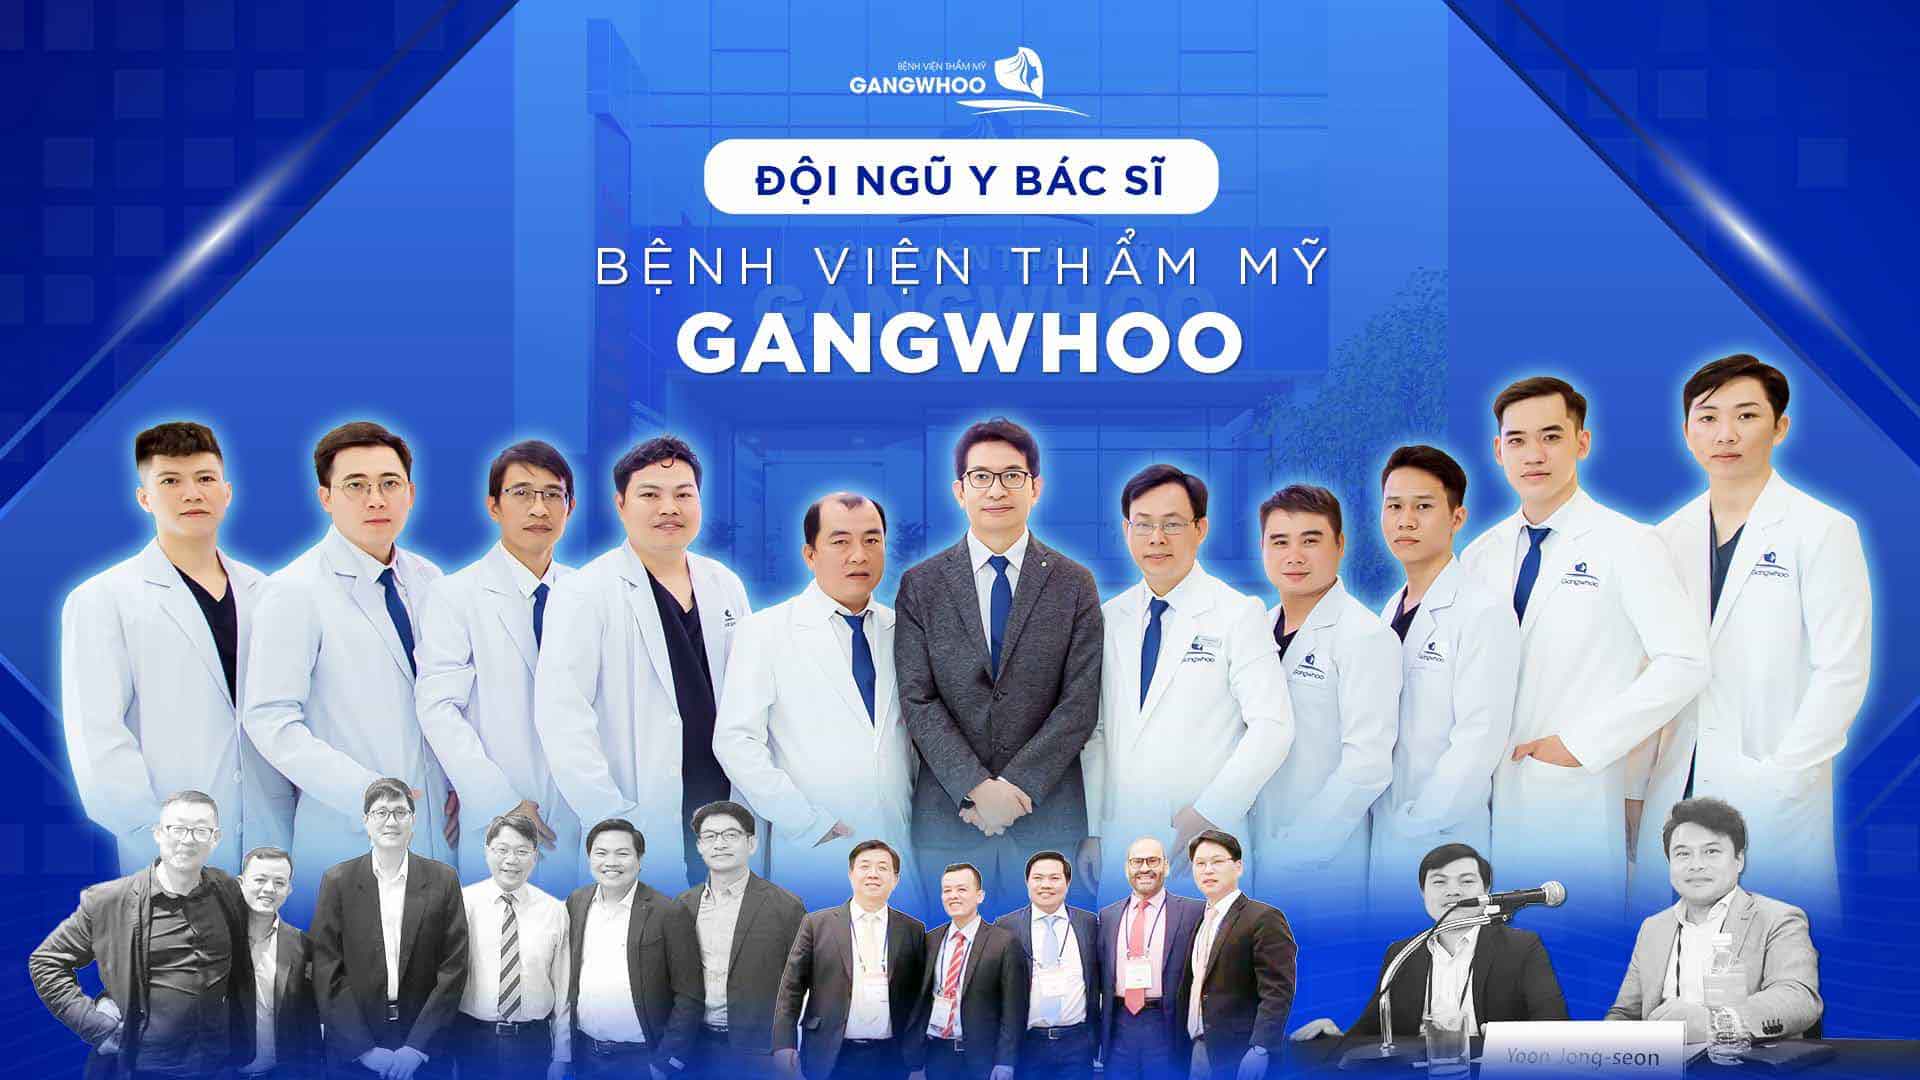 Professional surgeons and specialists at Gangwhoo